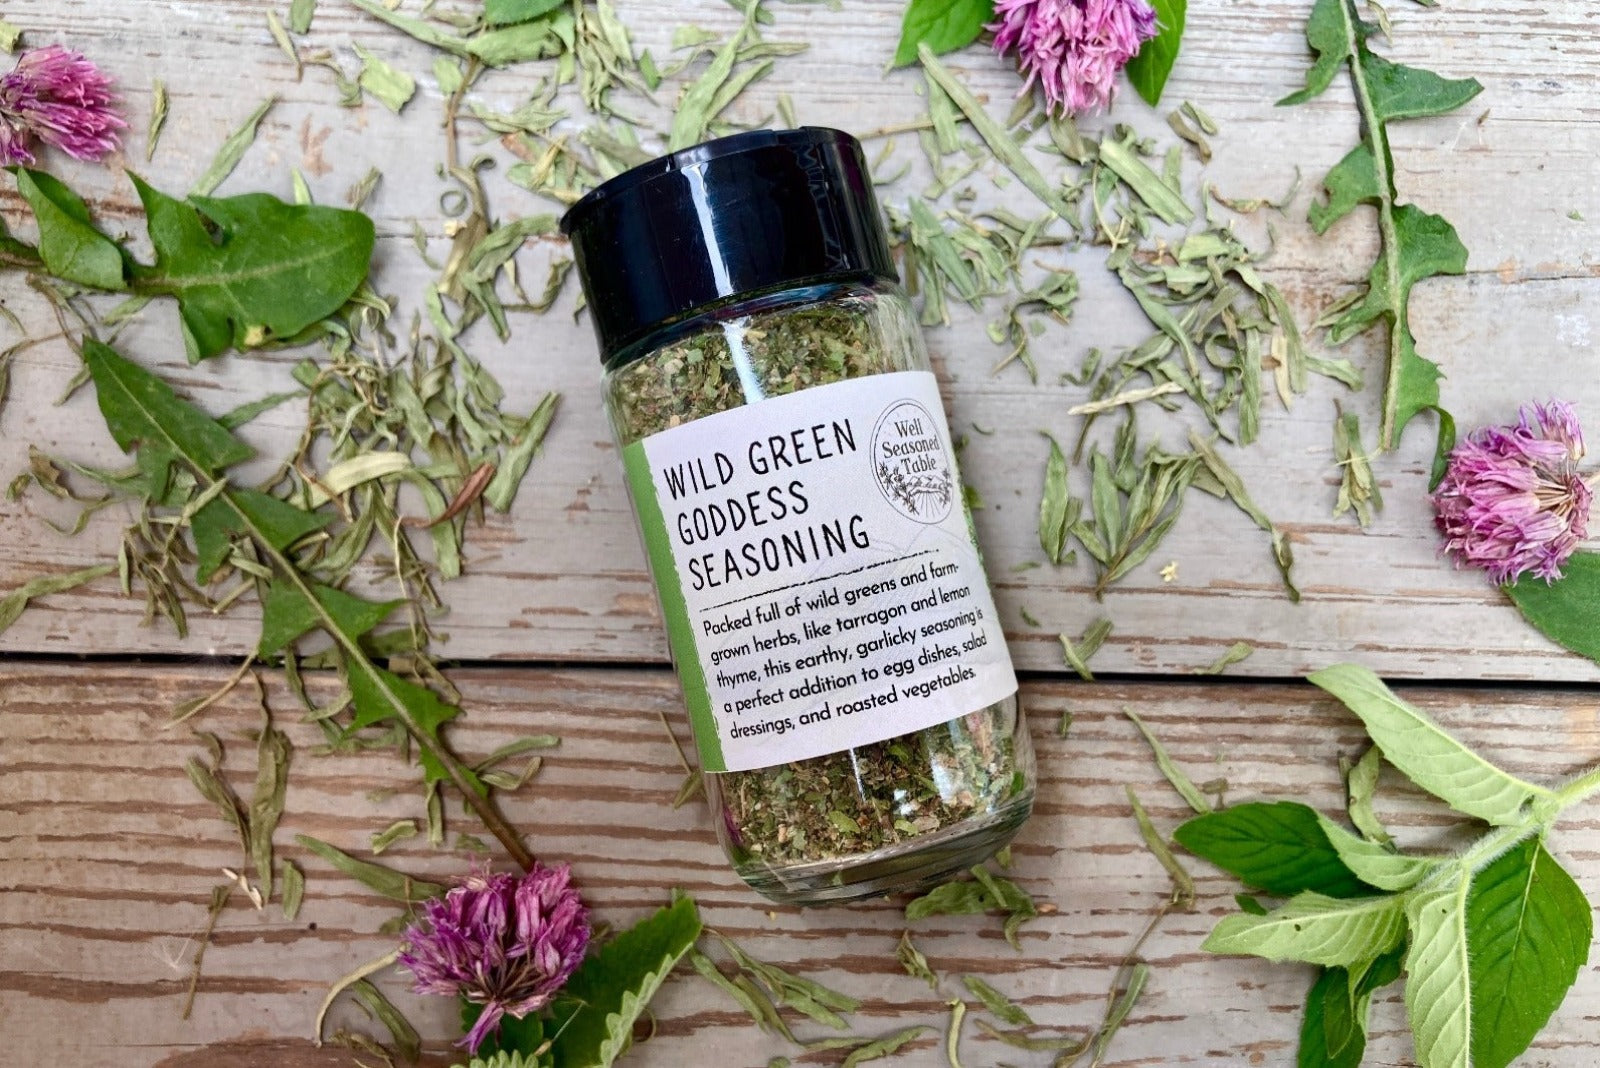 A glass shaker jar of Wild Green Goddess Seasoning from Well Seasoned Table on a wooden background with wild greens and chive blossoms around it.